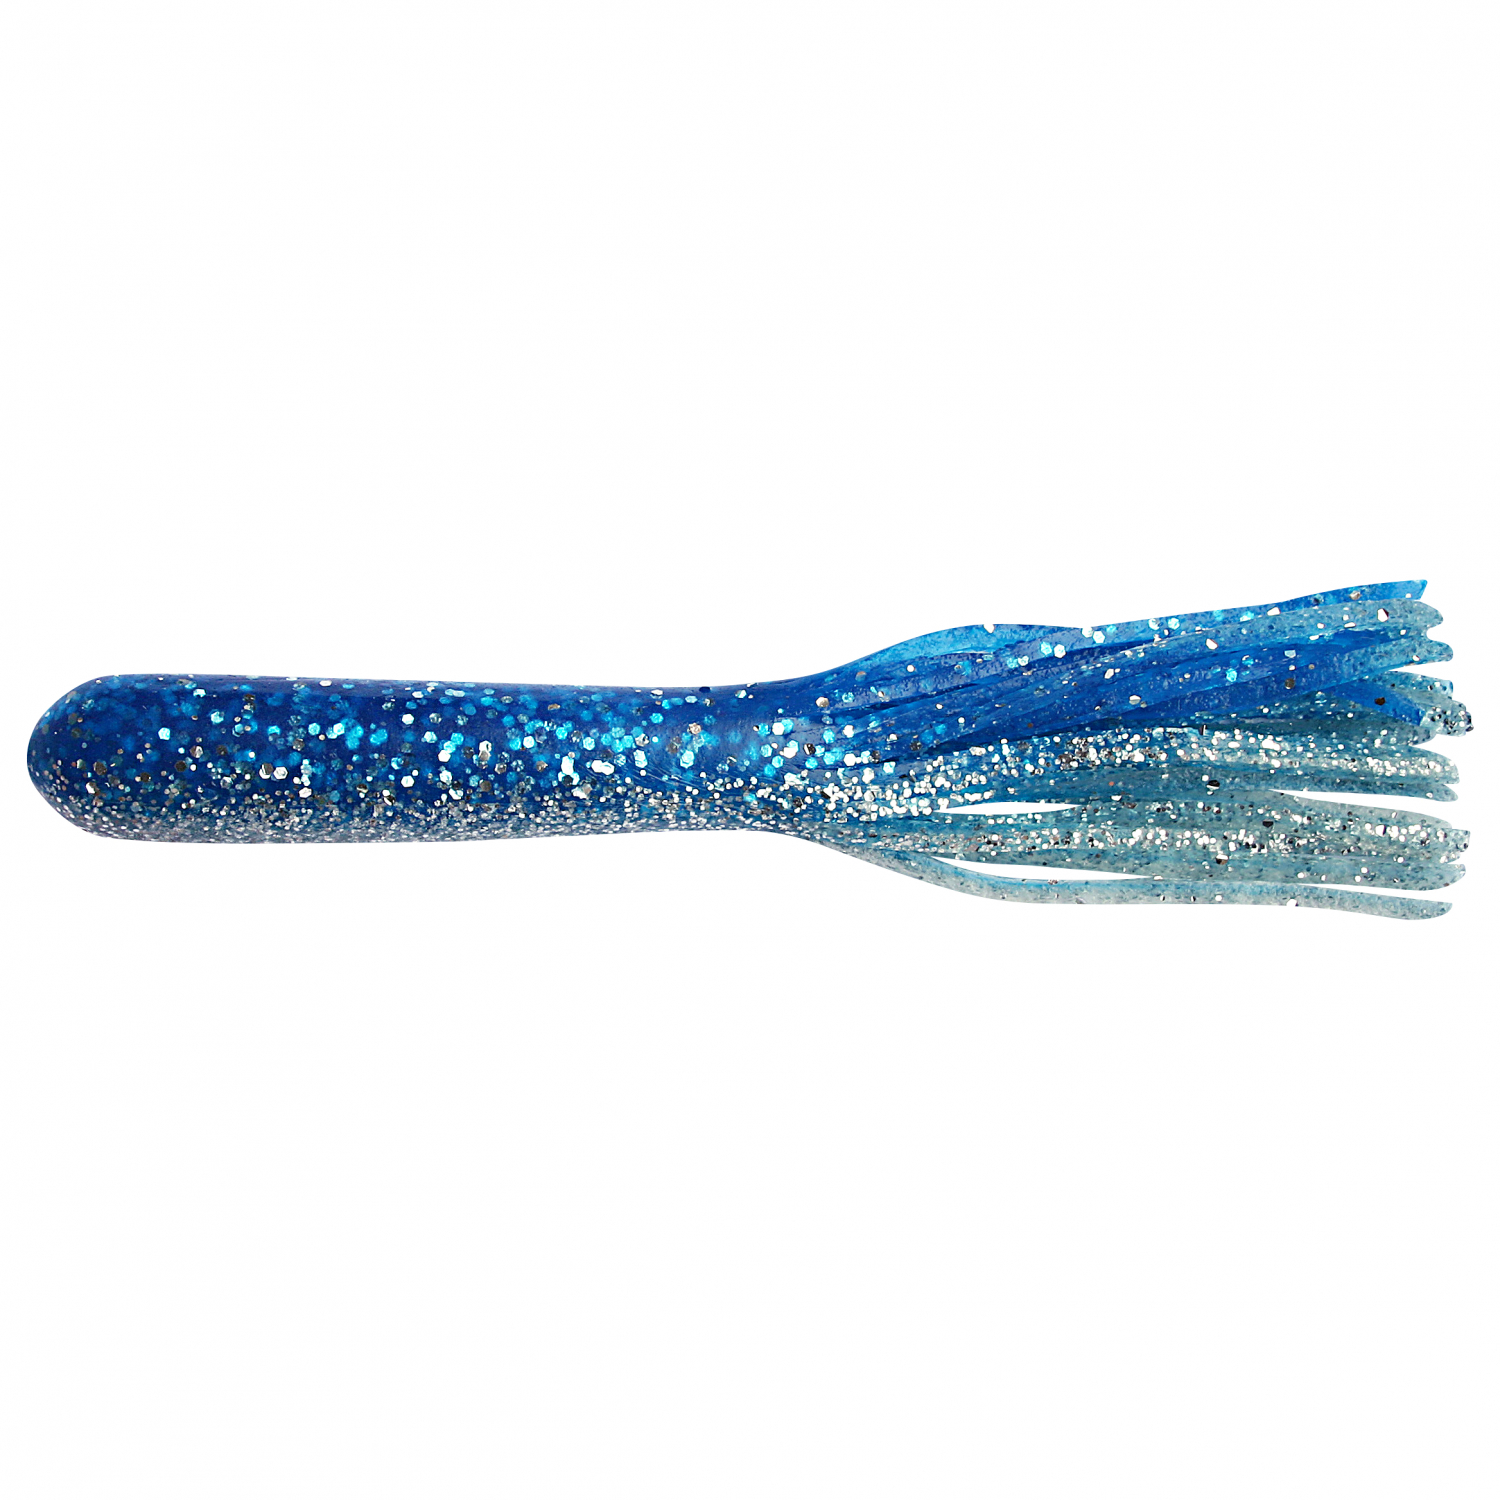 ShadXperts Fringed Bait Magnum Tube 5" (clear silver/blue-glitter) 